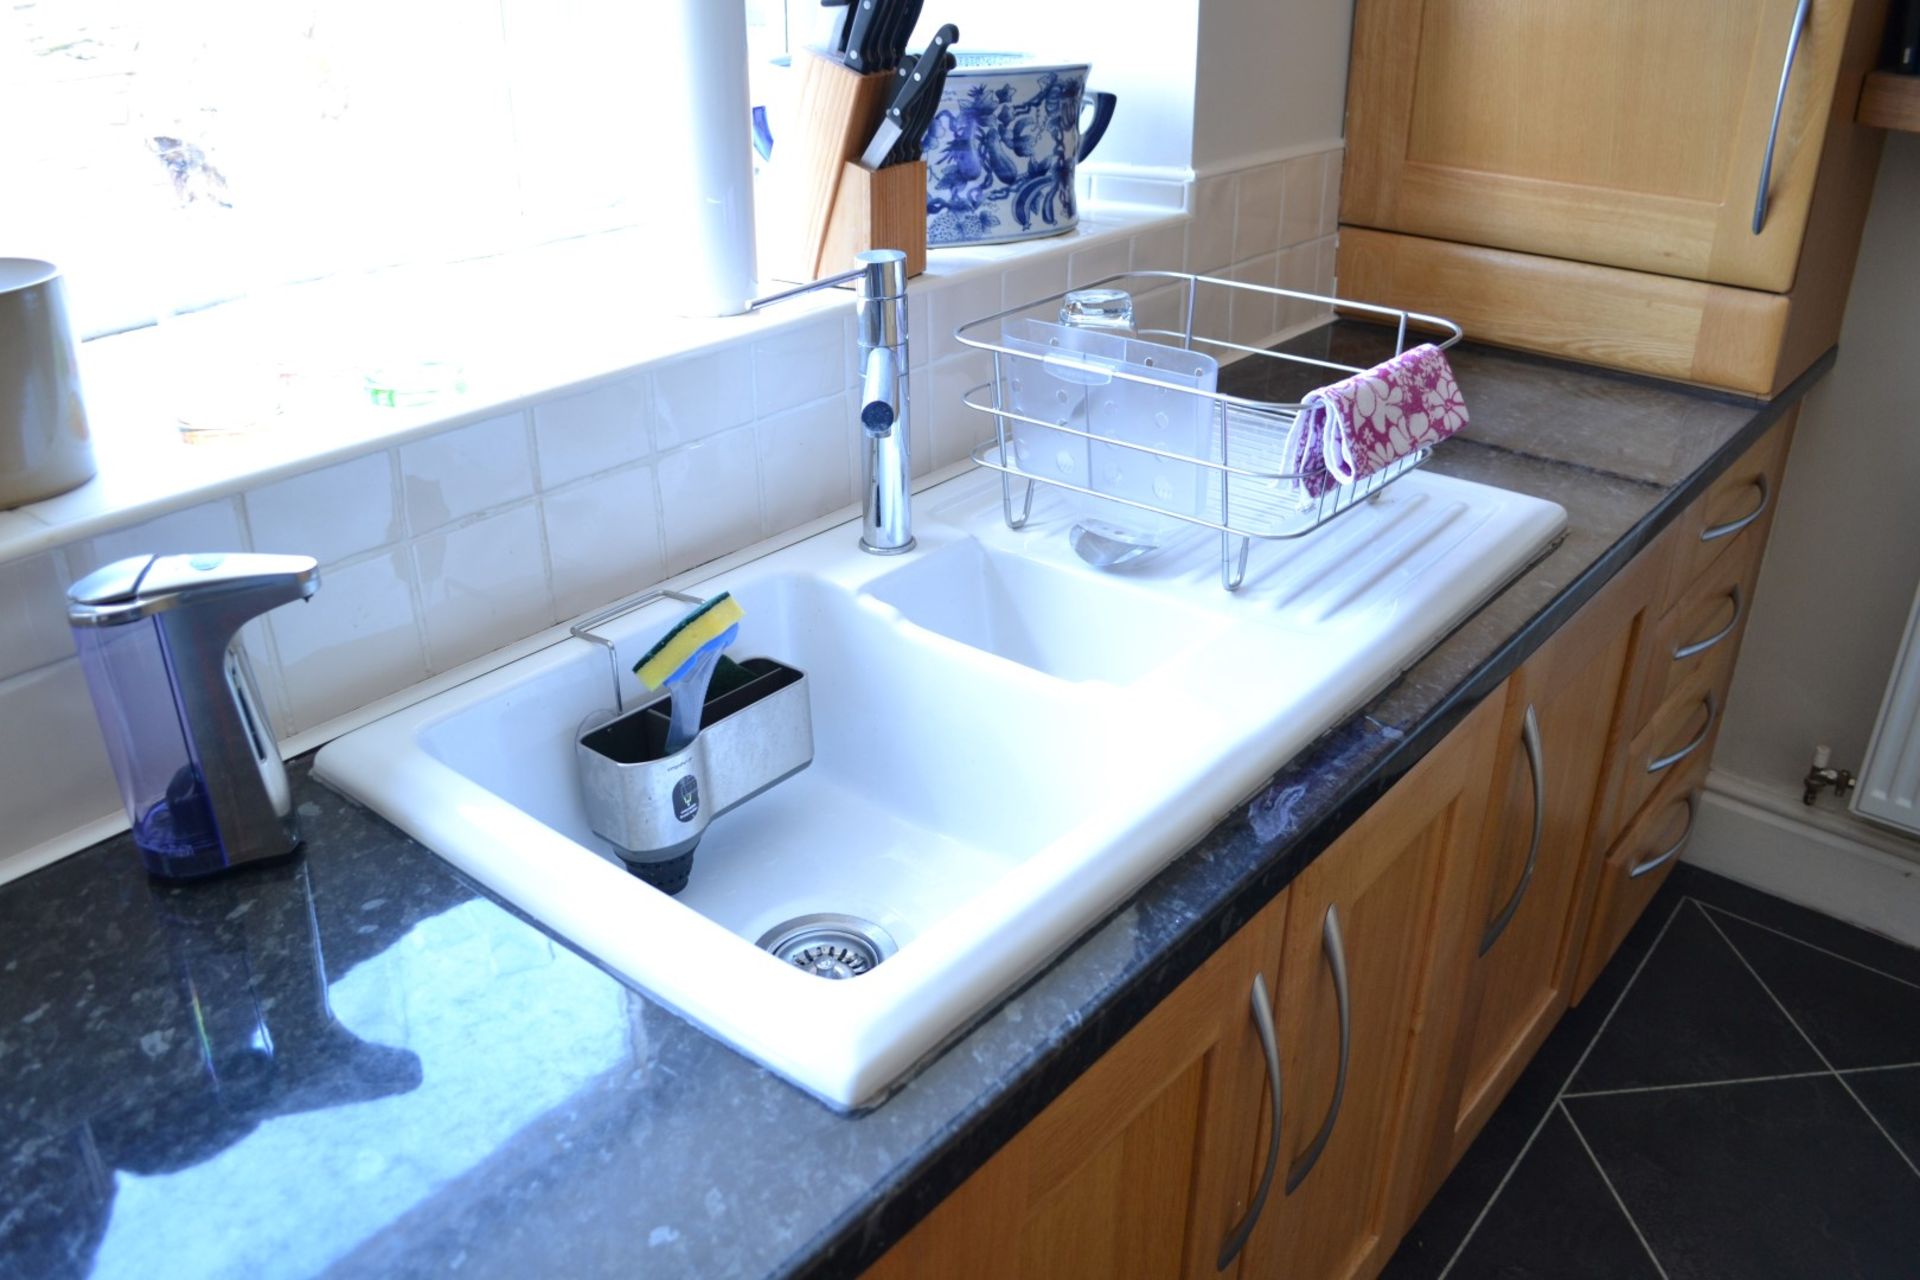 1 x Compact Fitted Kitchen With Neff and Tecnik Appliances - CL322 - Location: Pleasington, BB2 - * - Image 10 of 35